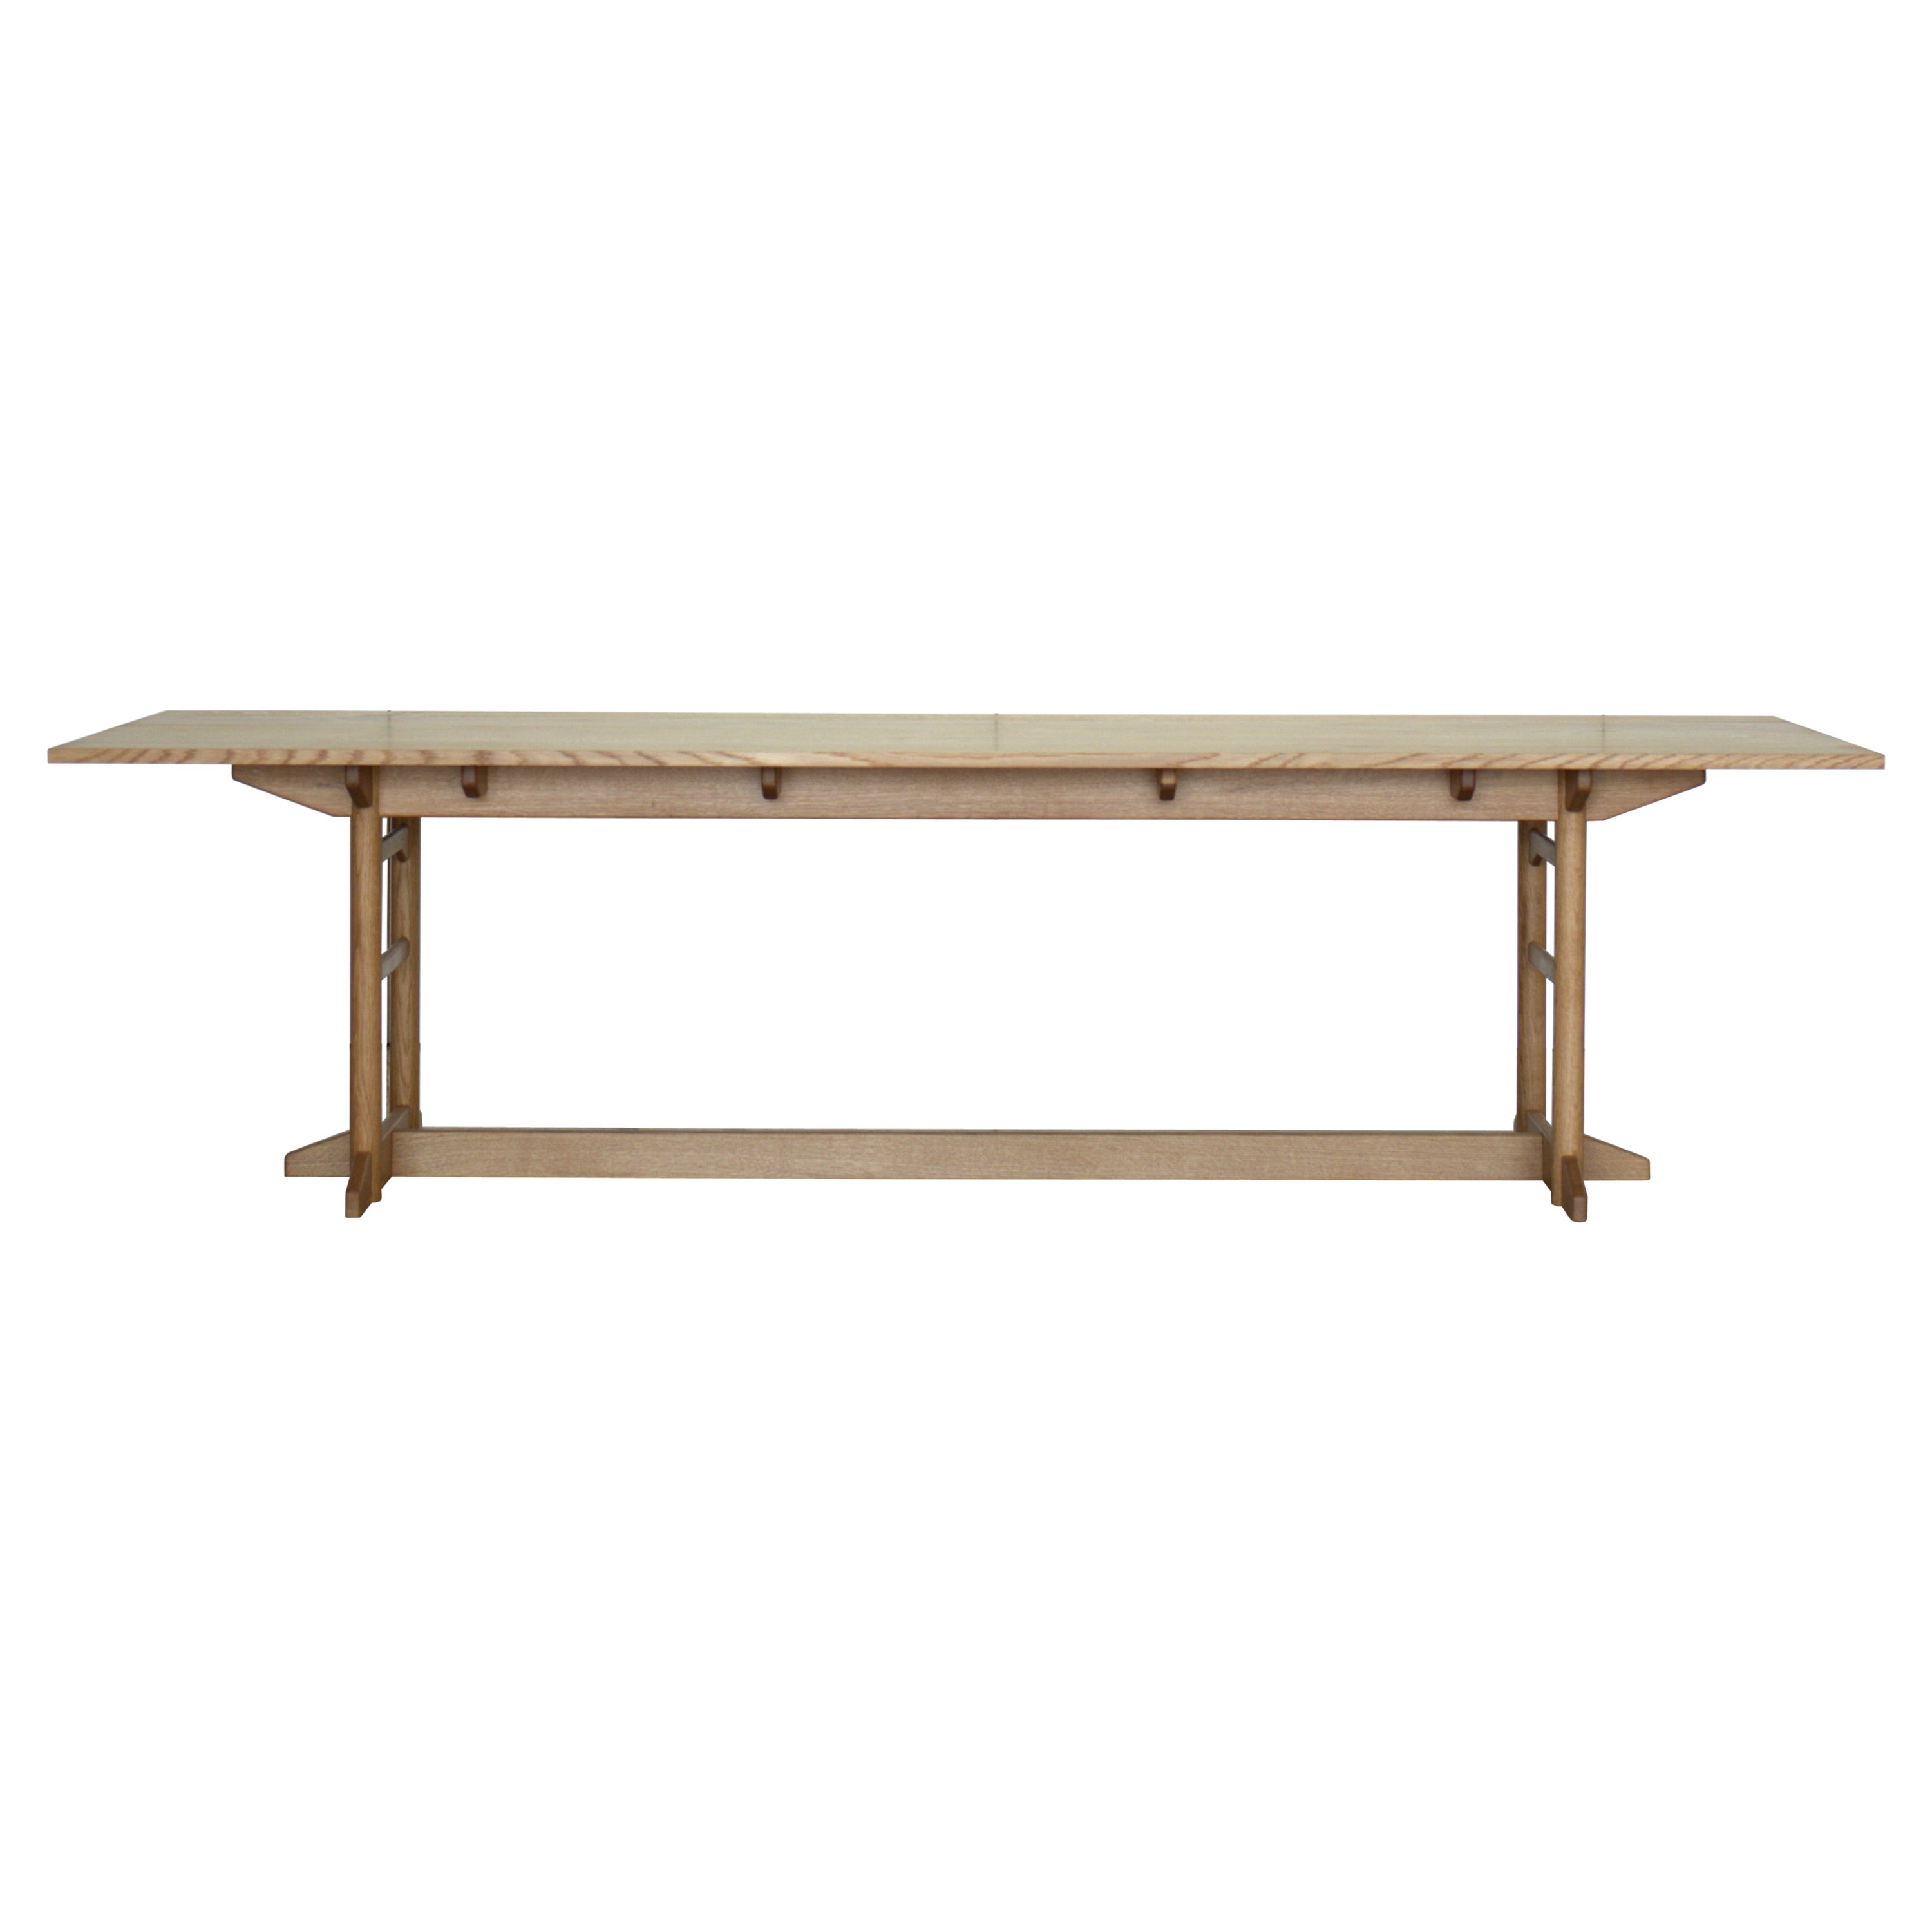 "FF06" Long Trestle Dining Table in White Oak by Stokes Furniture